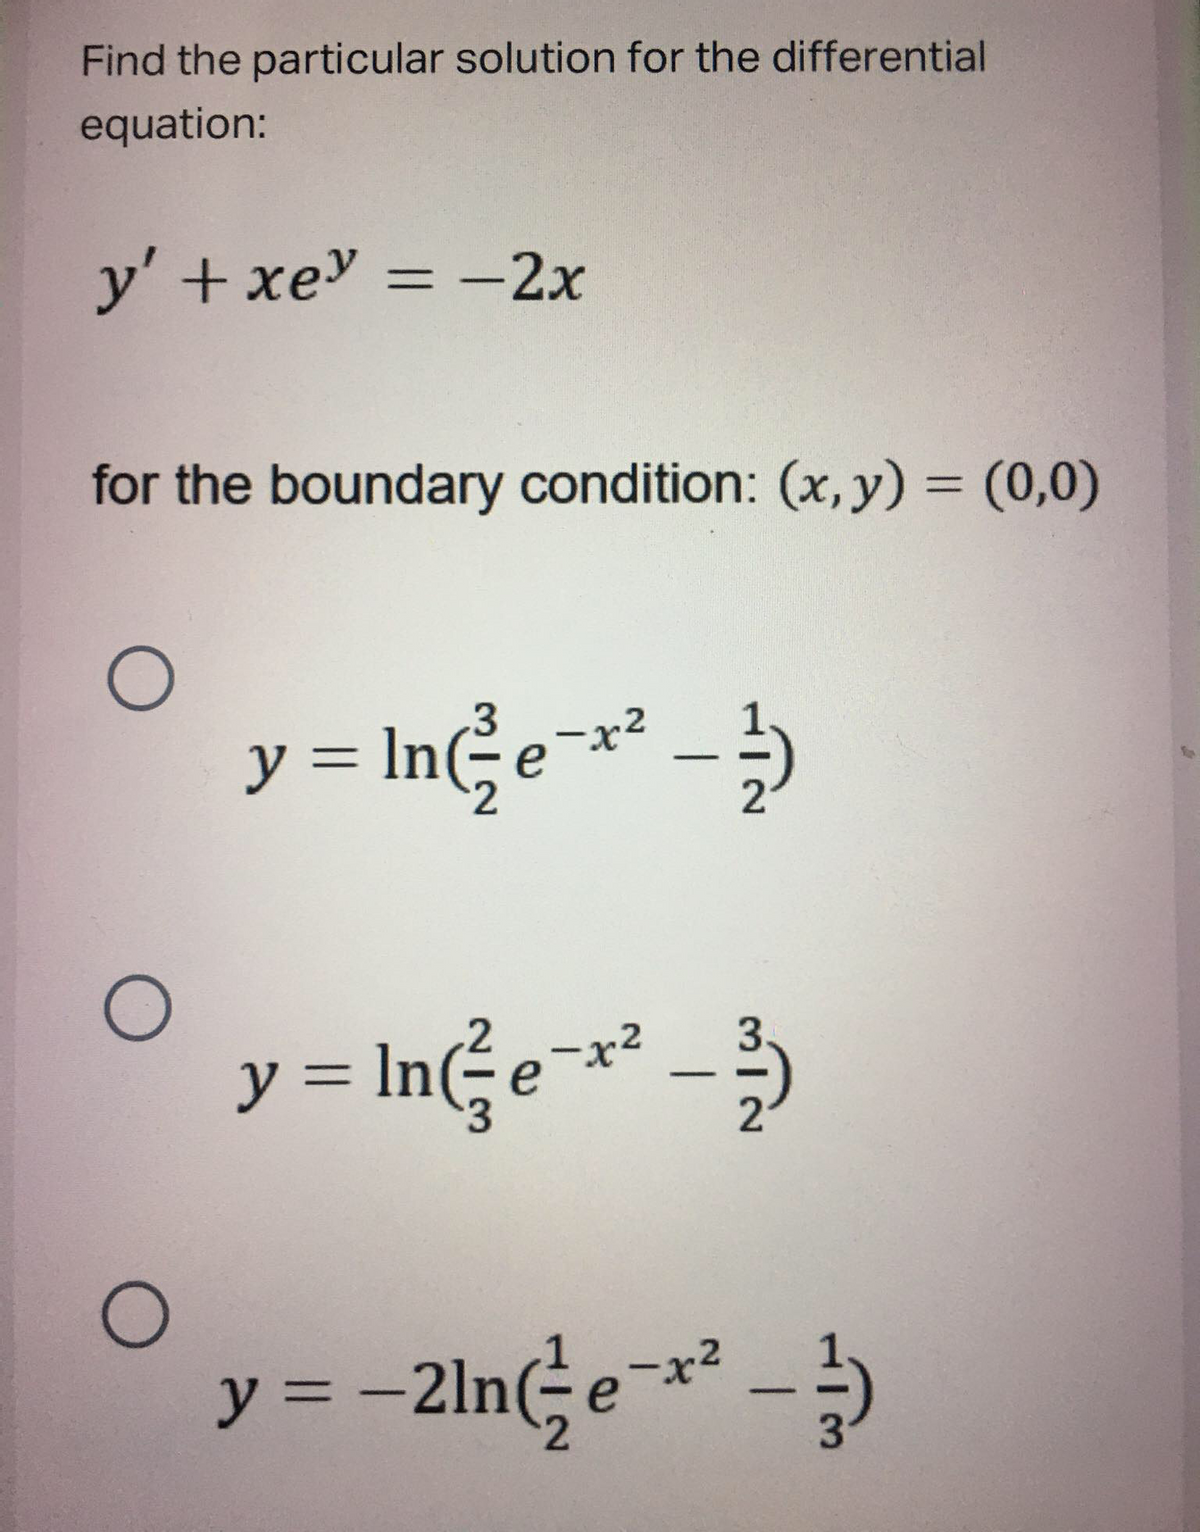 Find the particular solution for the differential
equation:
y' + xe = -2x
%3D
for the boundary condition: (x, y) = (0,0)
y = ING ¯*² - )
y = InGe™r² -)
y = -2ln;e¬** - )
-2ln e
|
